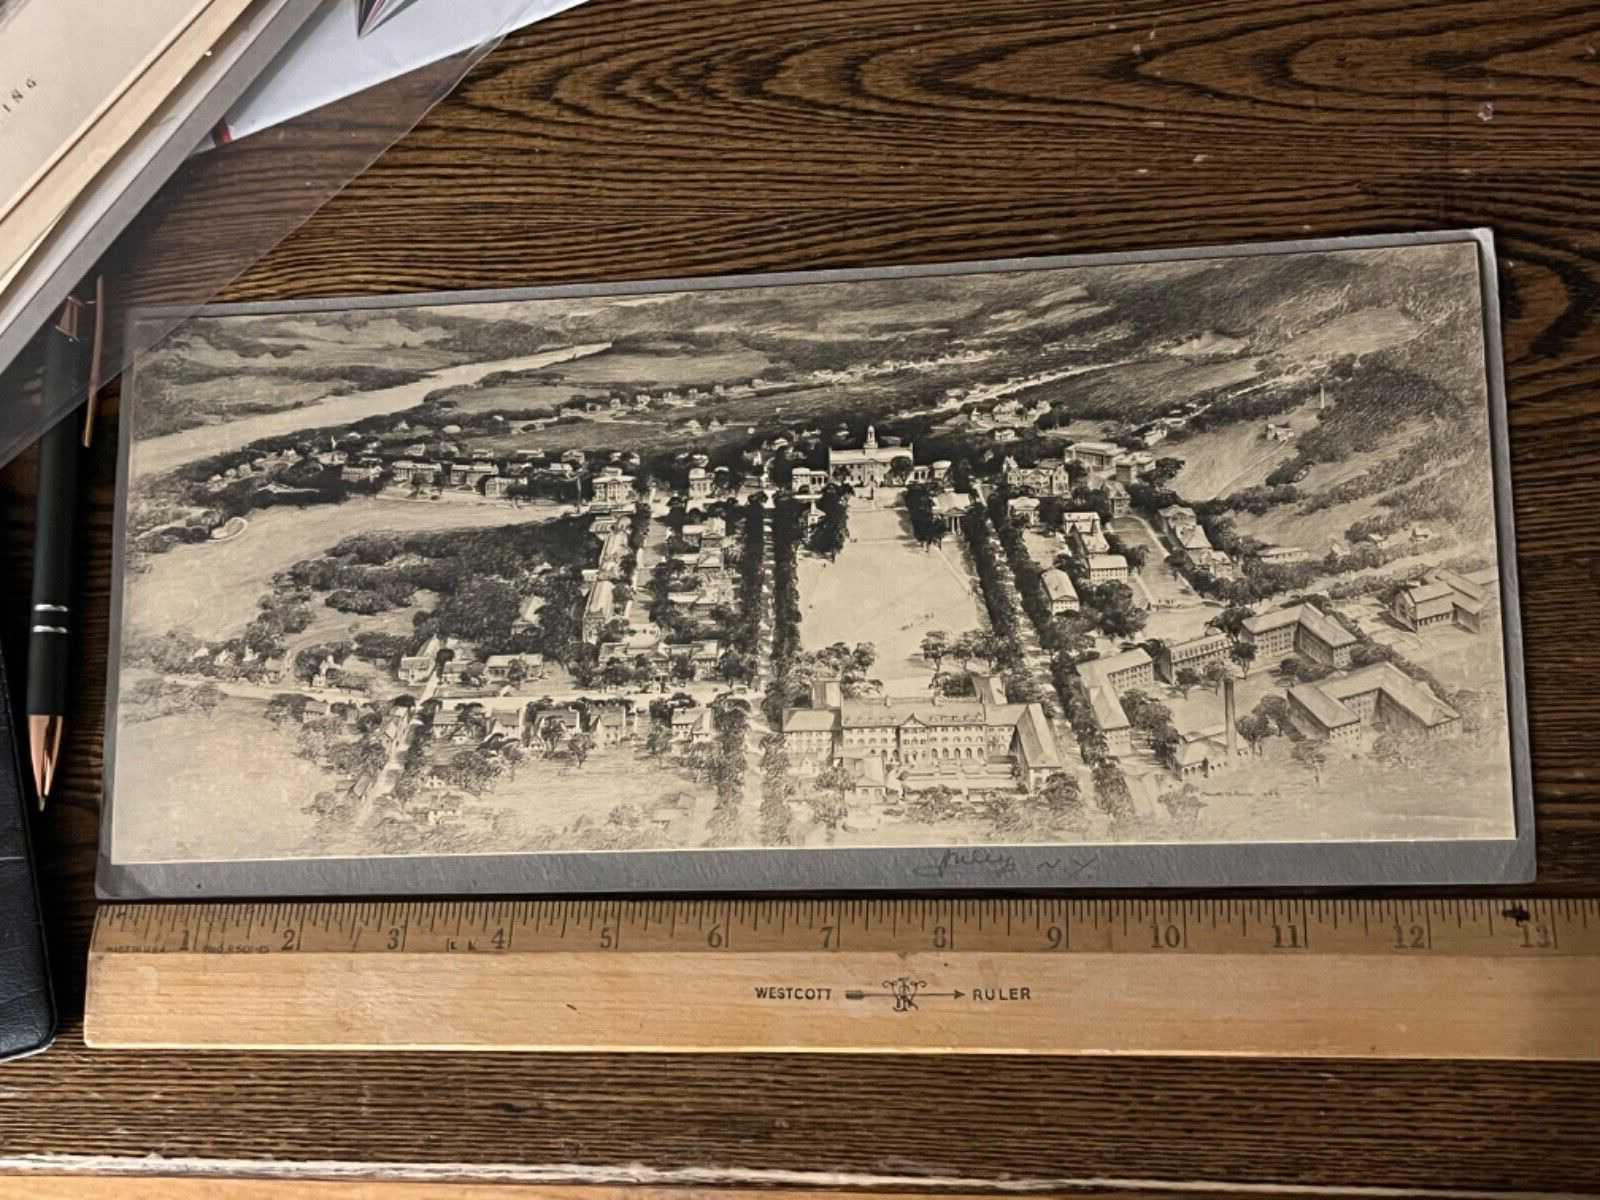 1927 Dartmouth College Aerial view Birds Eye architectural drawing proposed bldg